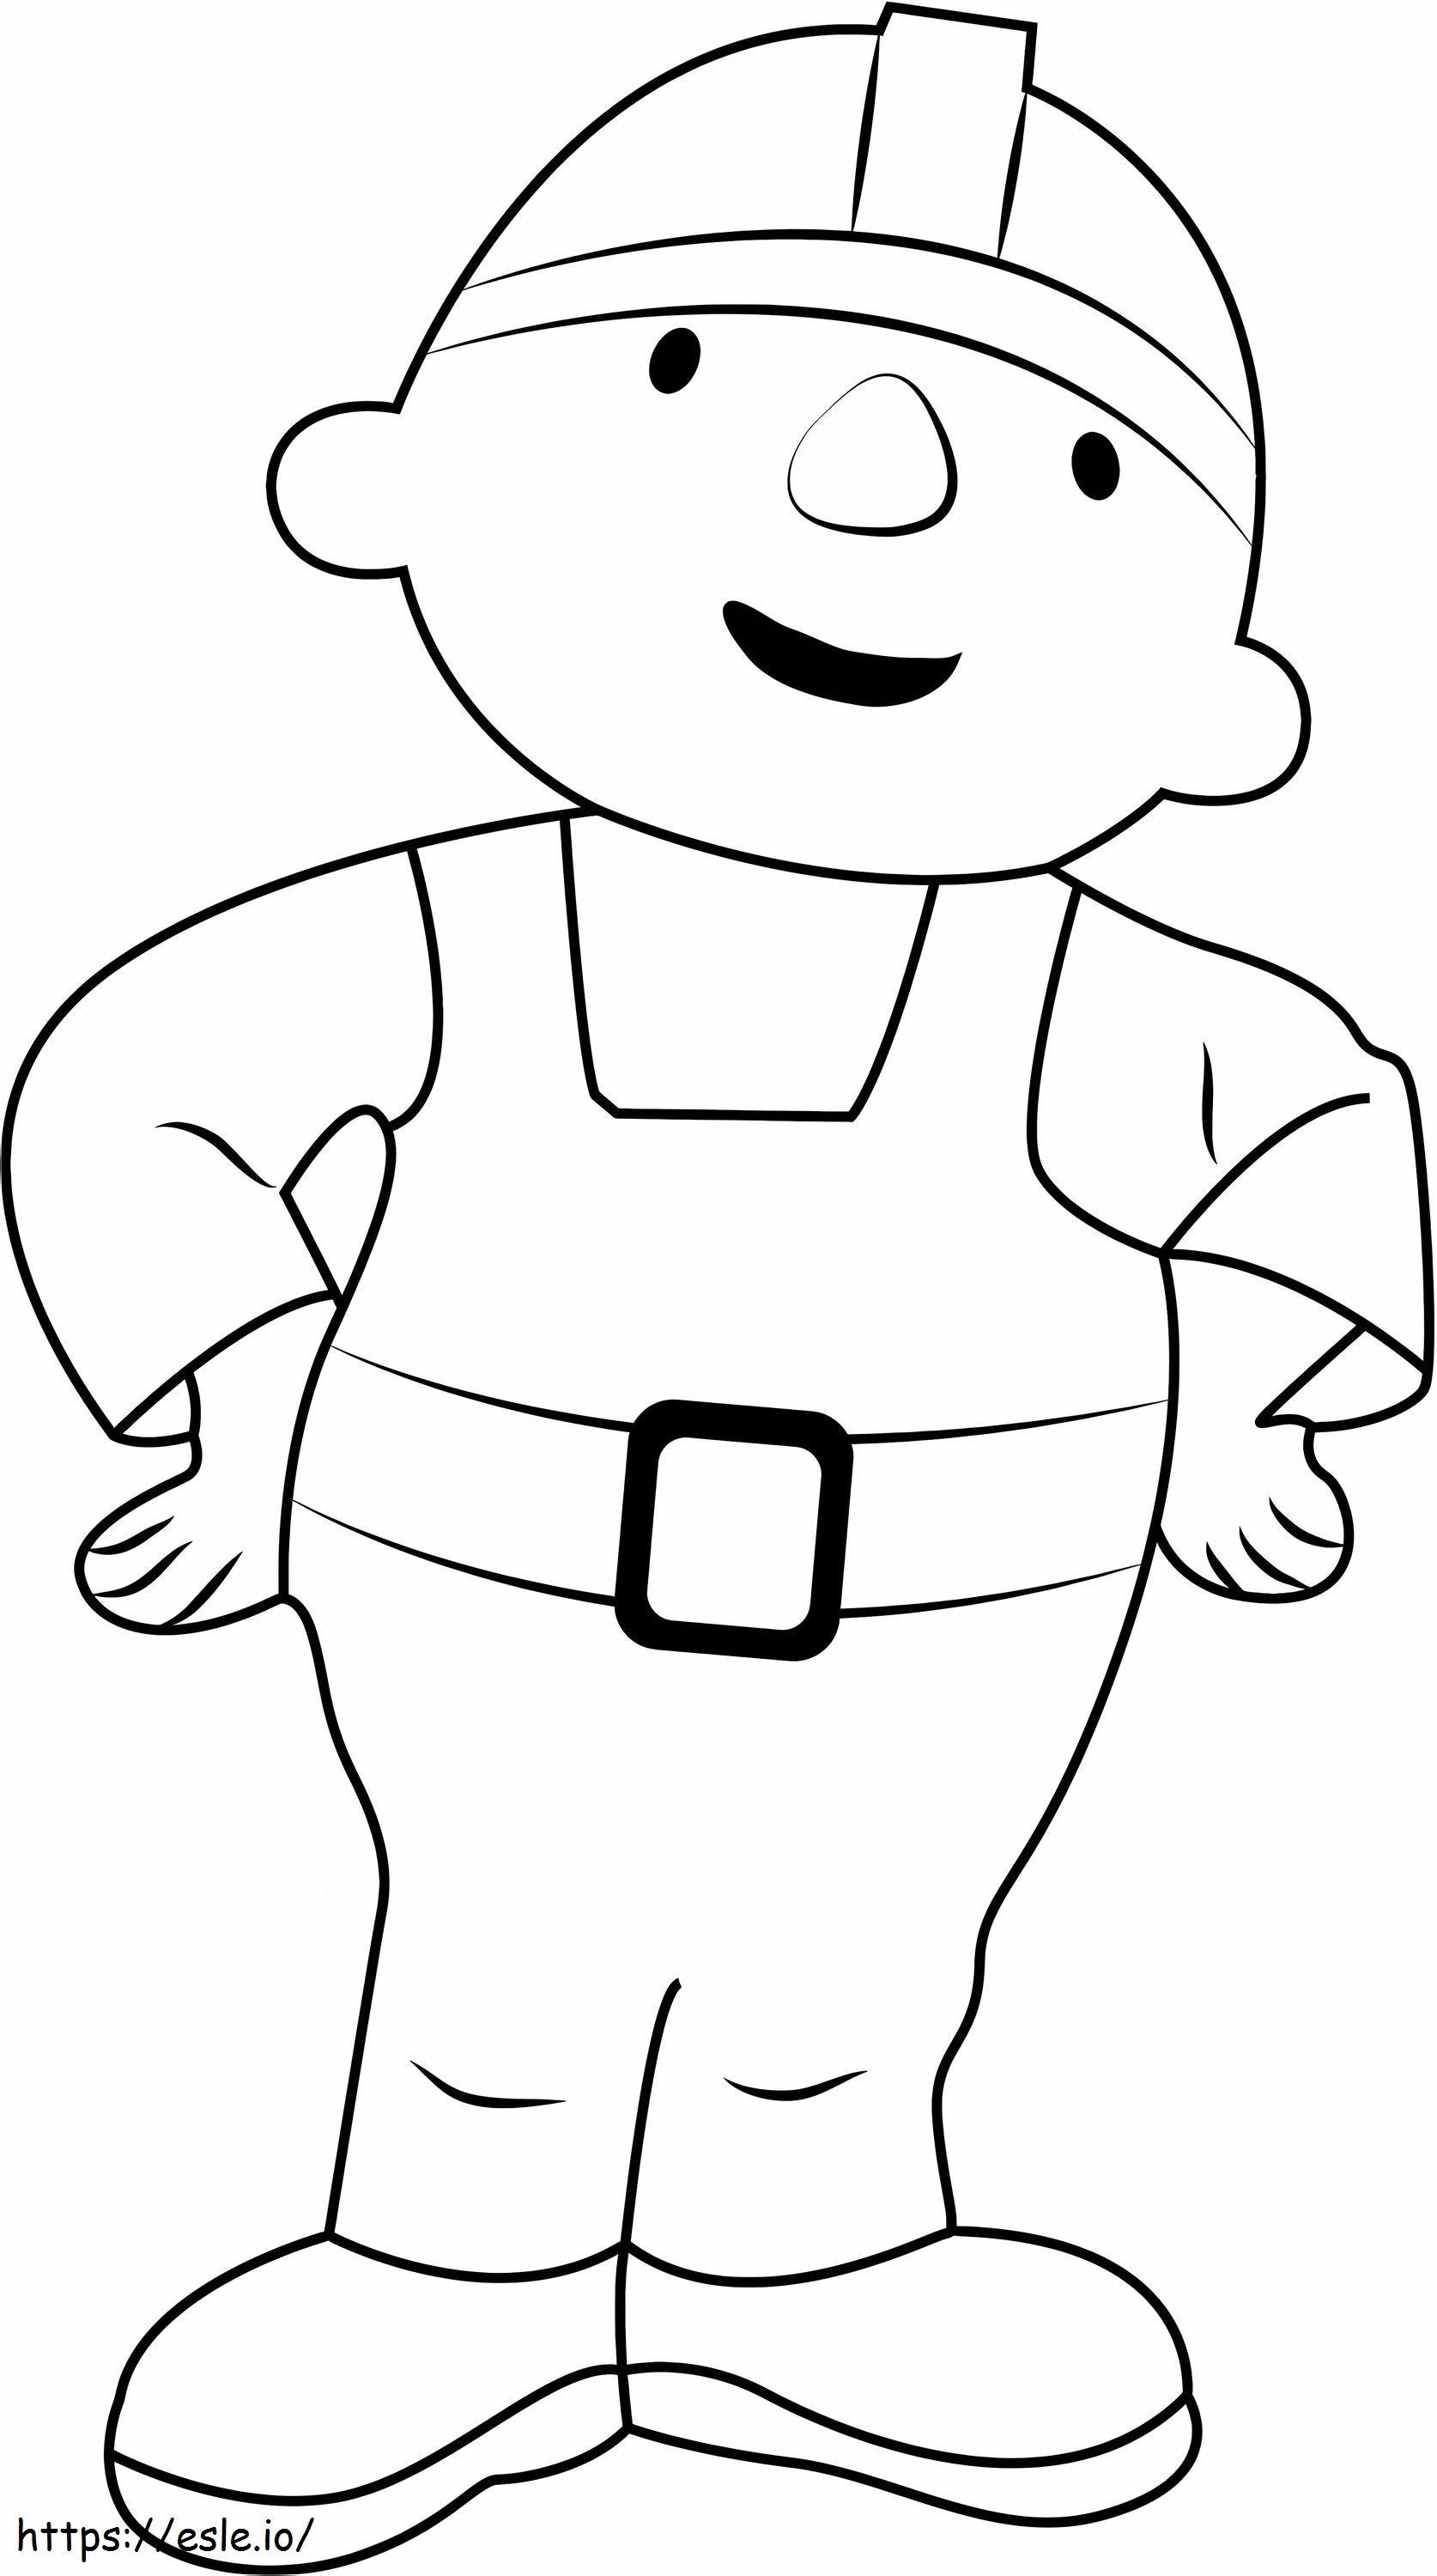 1531189489 Bob Smiling A4 coloring page